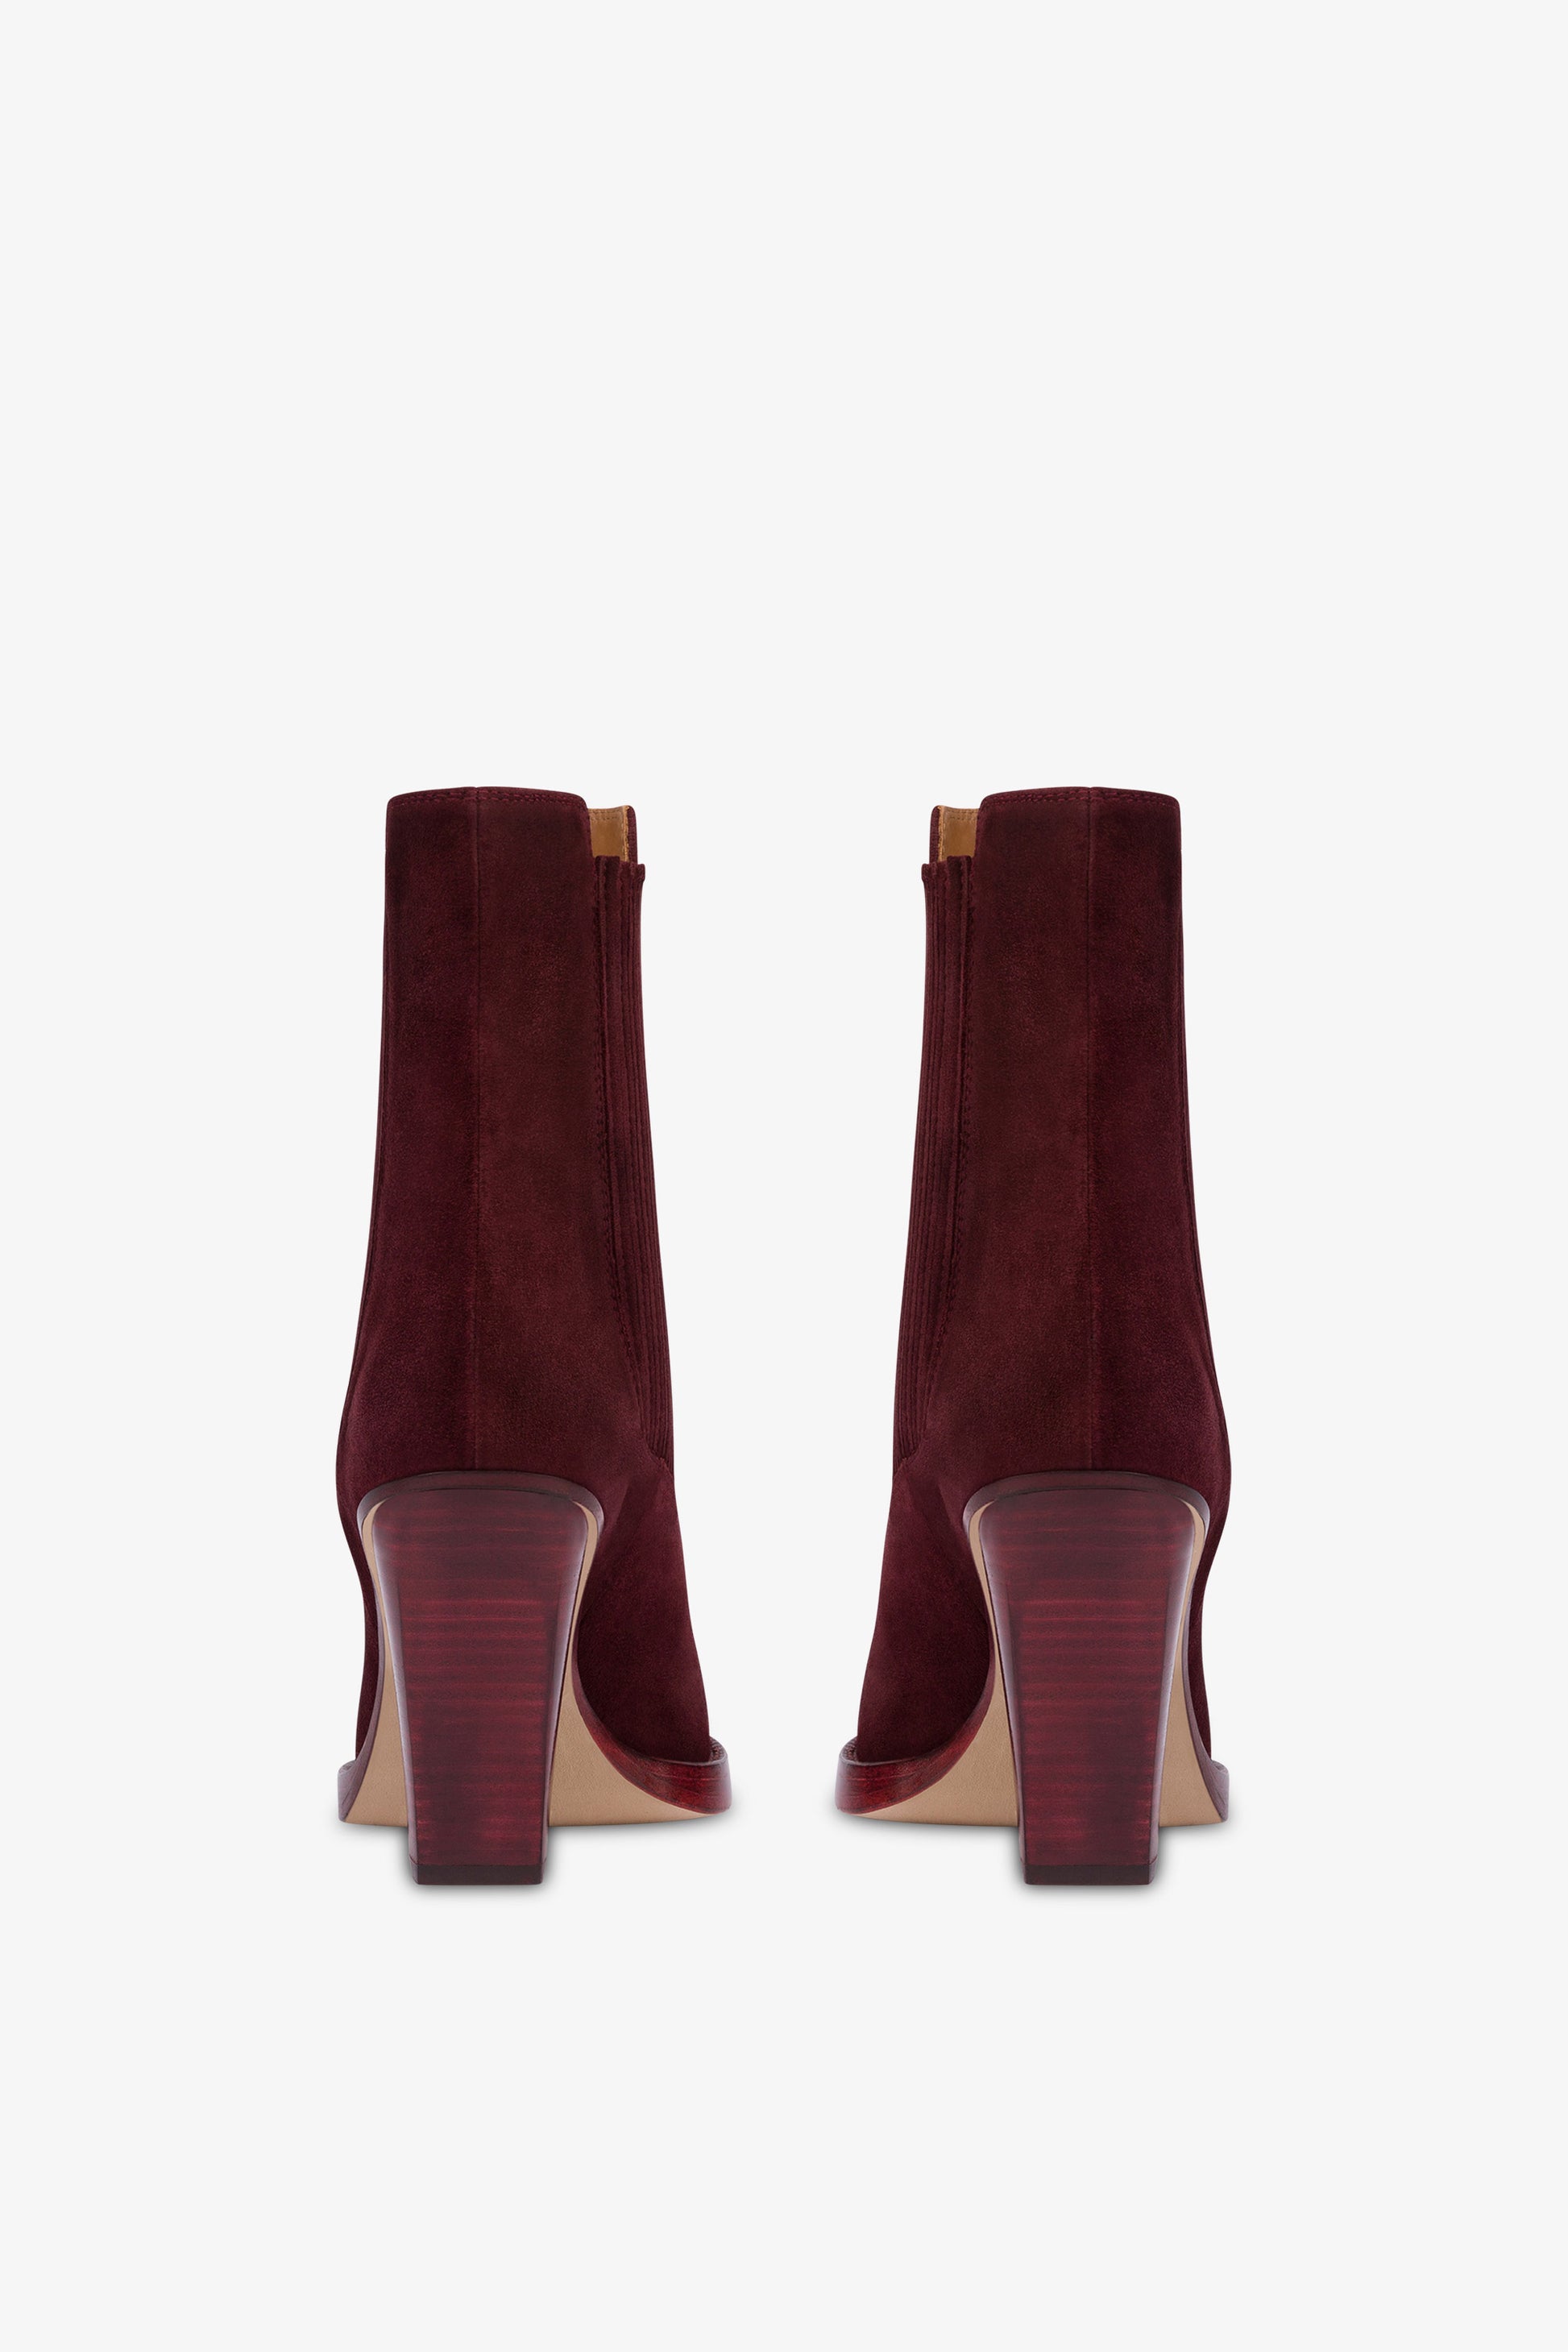 Square-toe ankle boots in Kenya suede leather